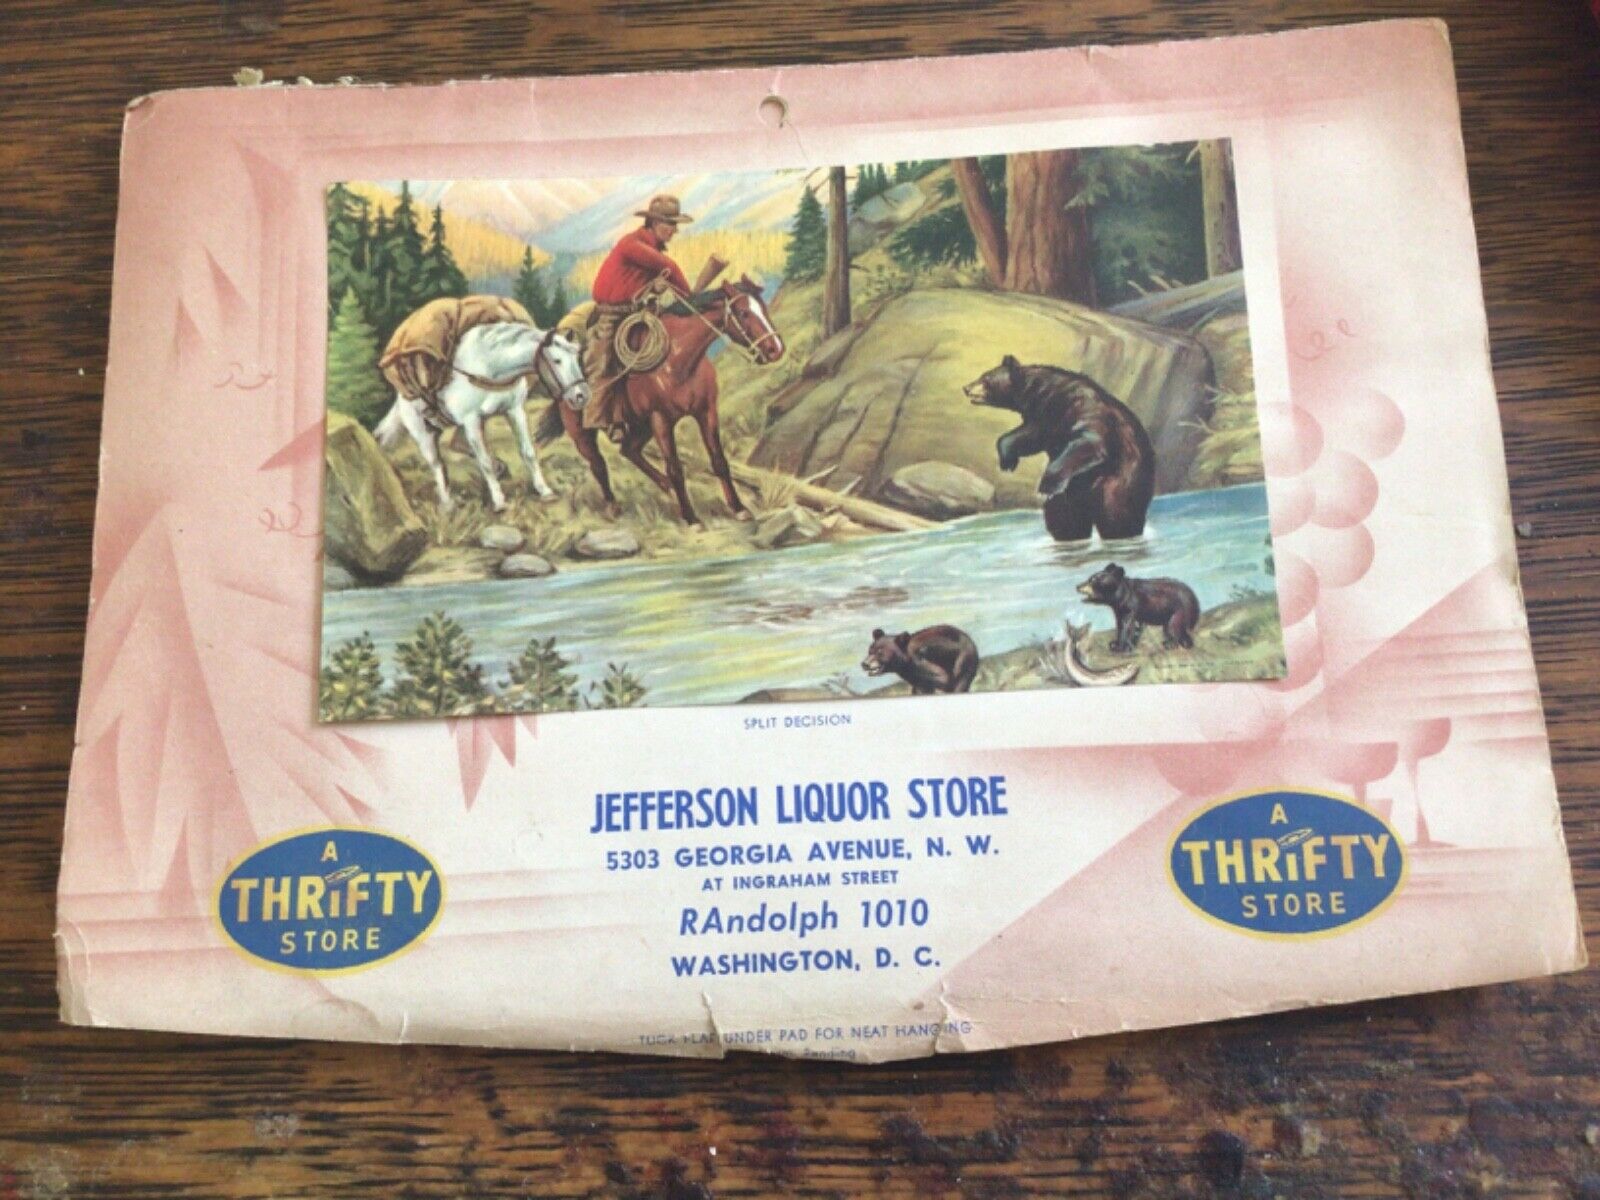 1949 Liquor Store Calendar With Color Western Print And Drink Information